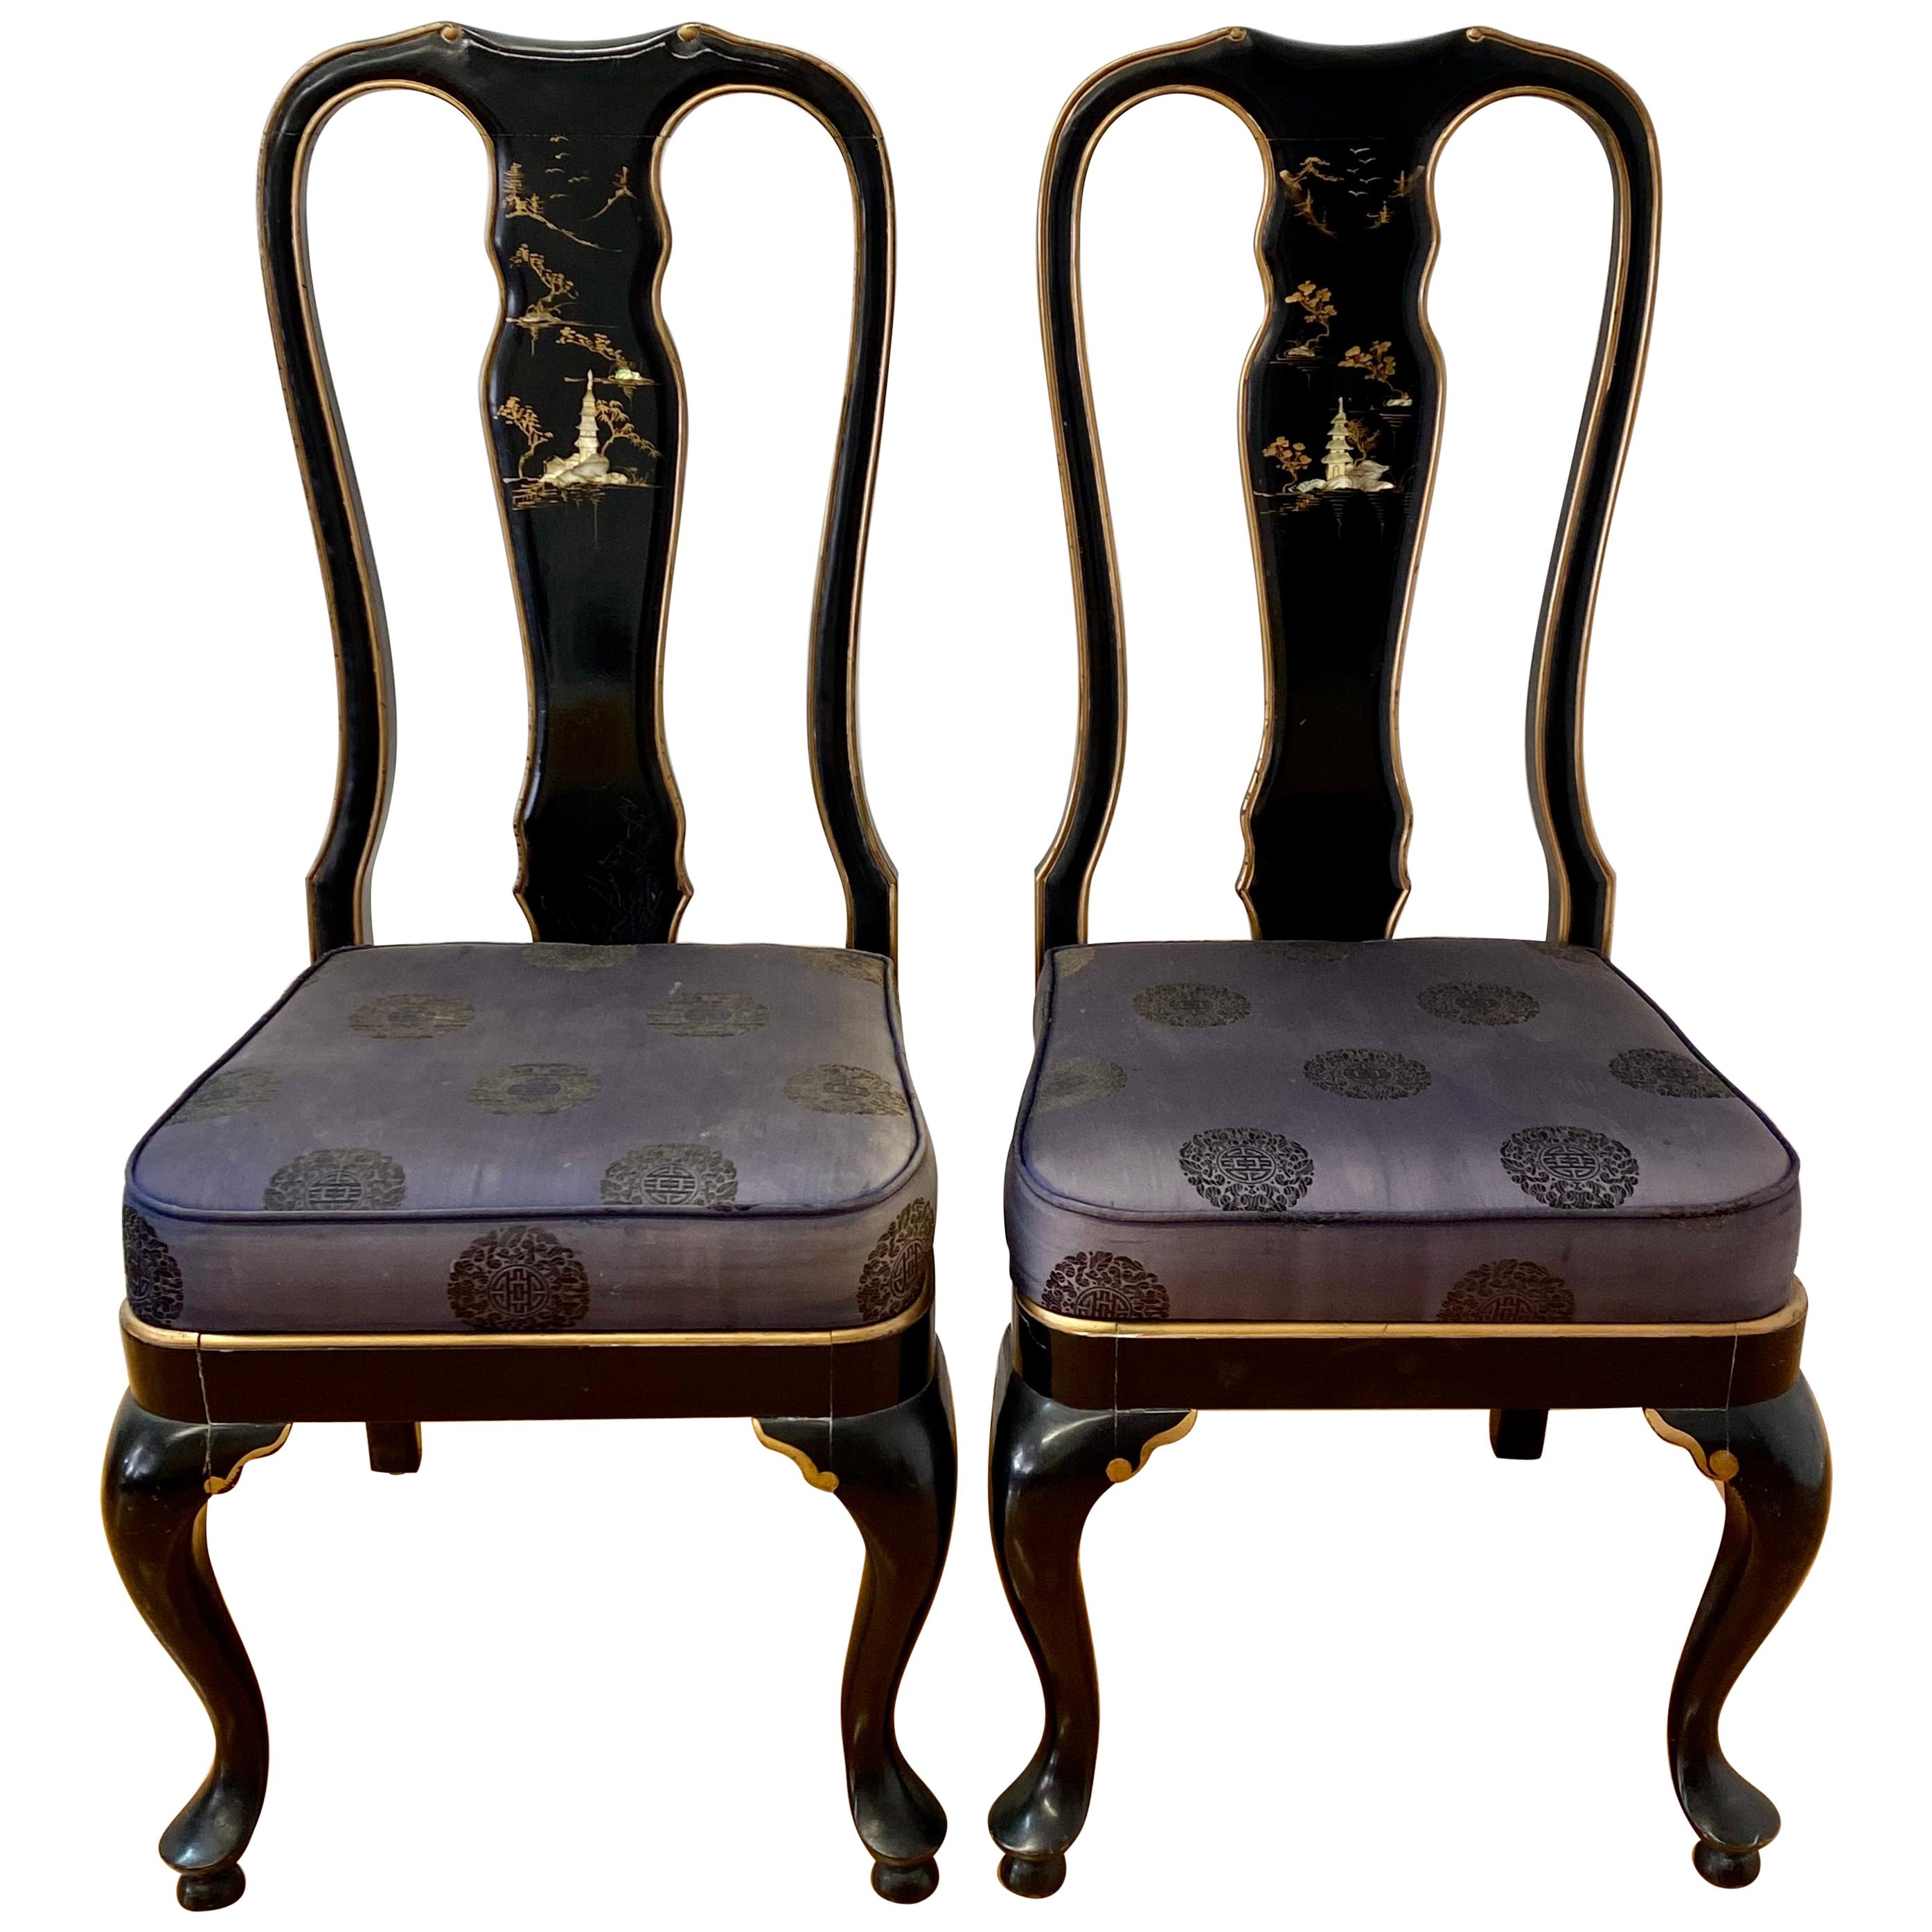 Pair of Asain Black Lacquer and Mother of Pearl Inlay Side Chairs 20th C.